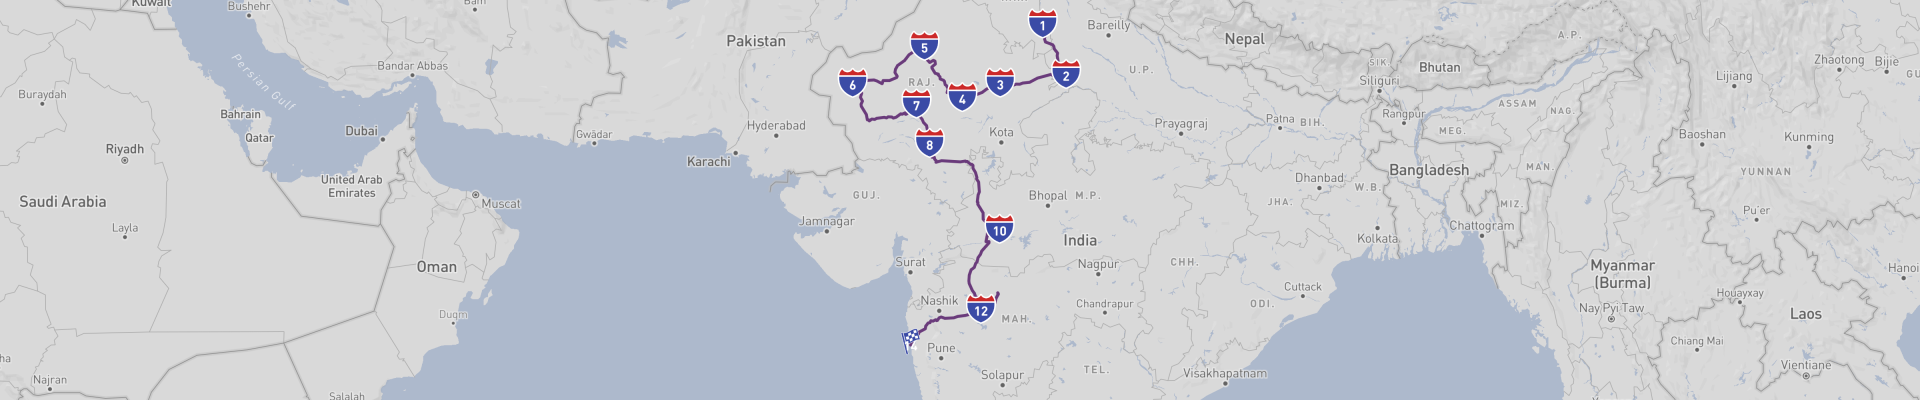 Central India Grand Tour